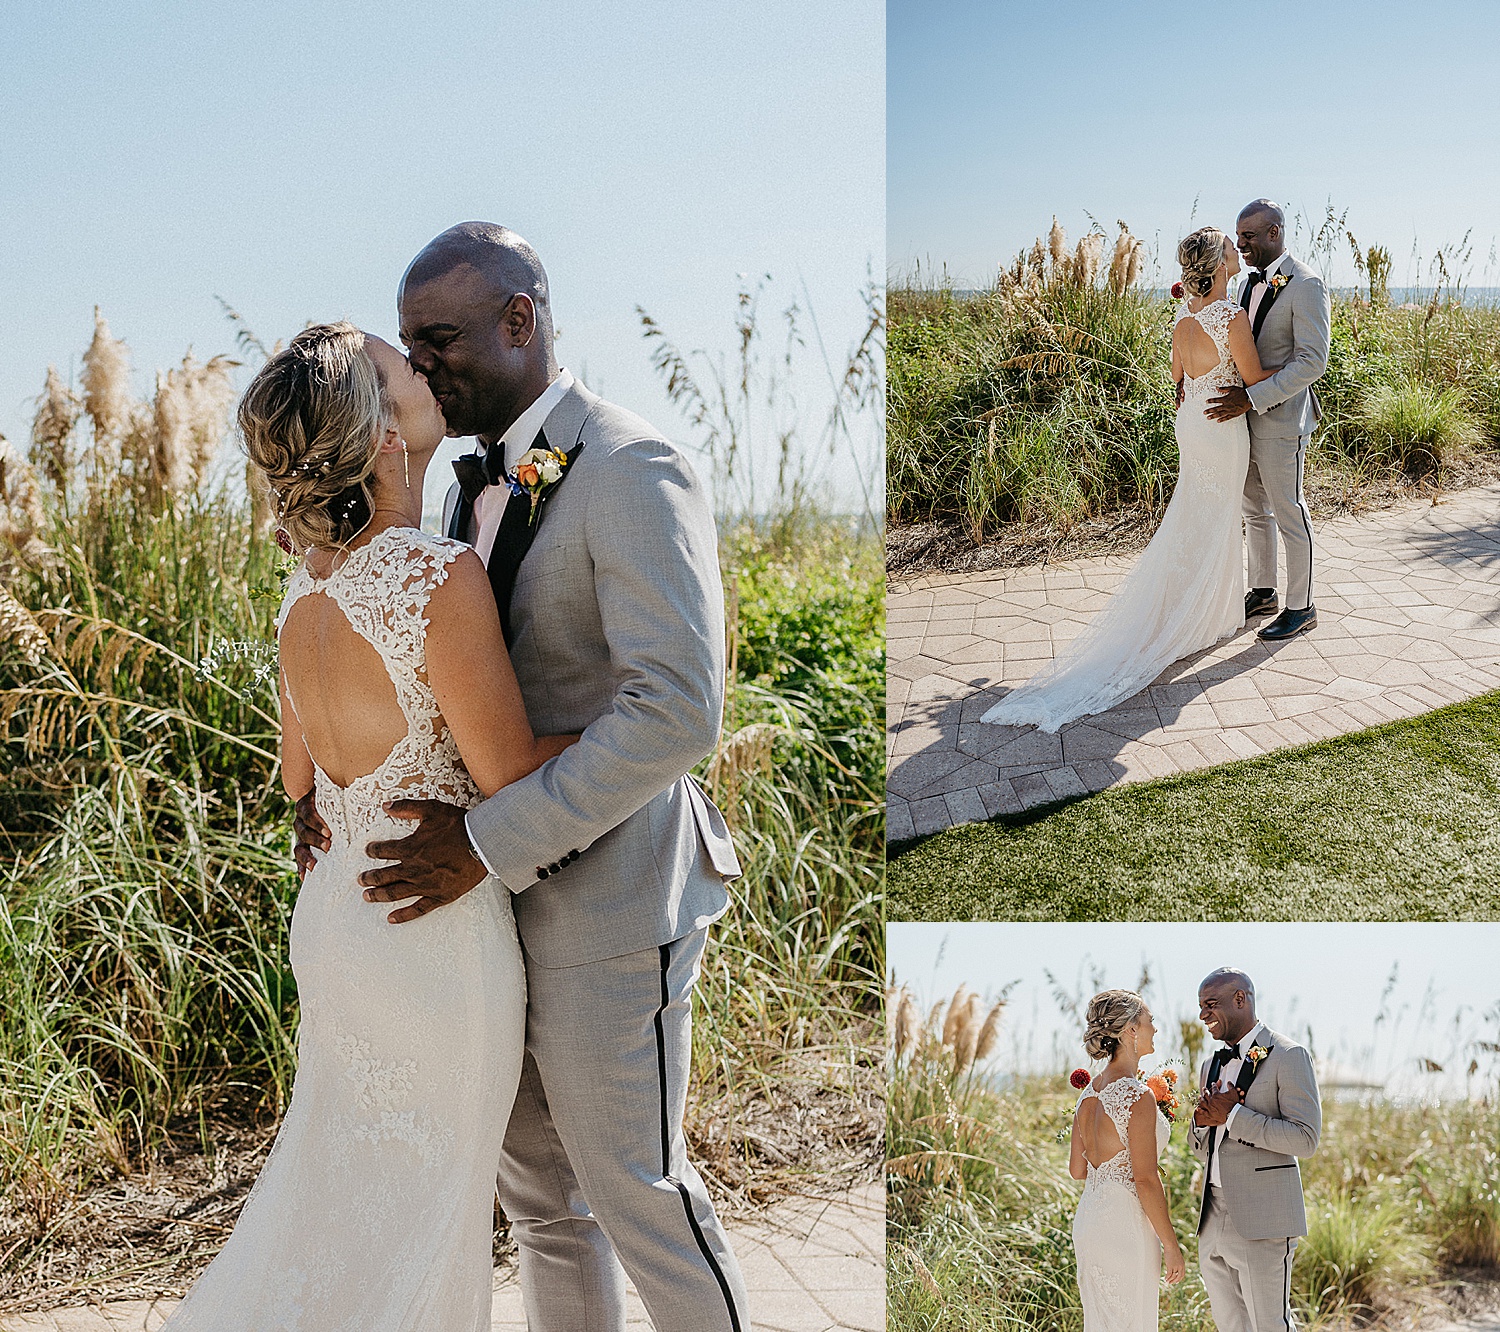 Bride and groom  share first look and kiss after seeing each other for the first time before ceremony